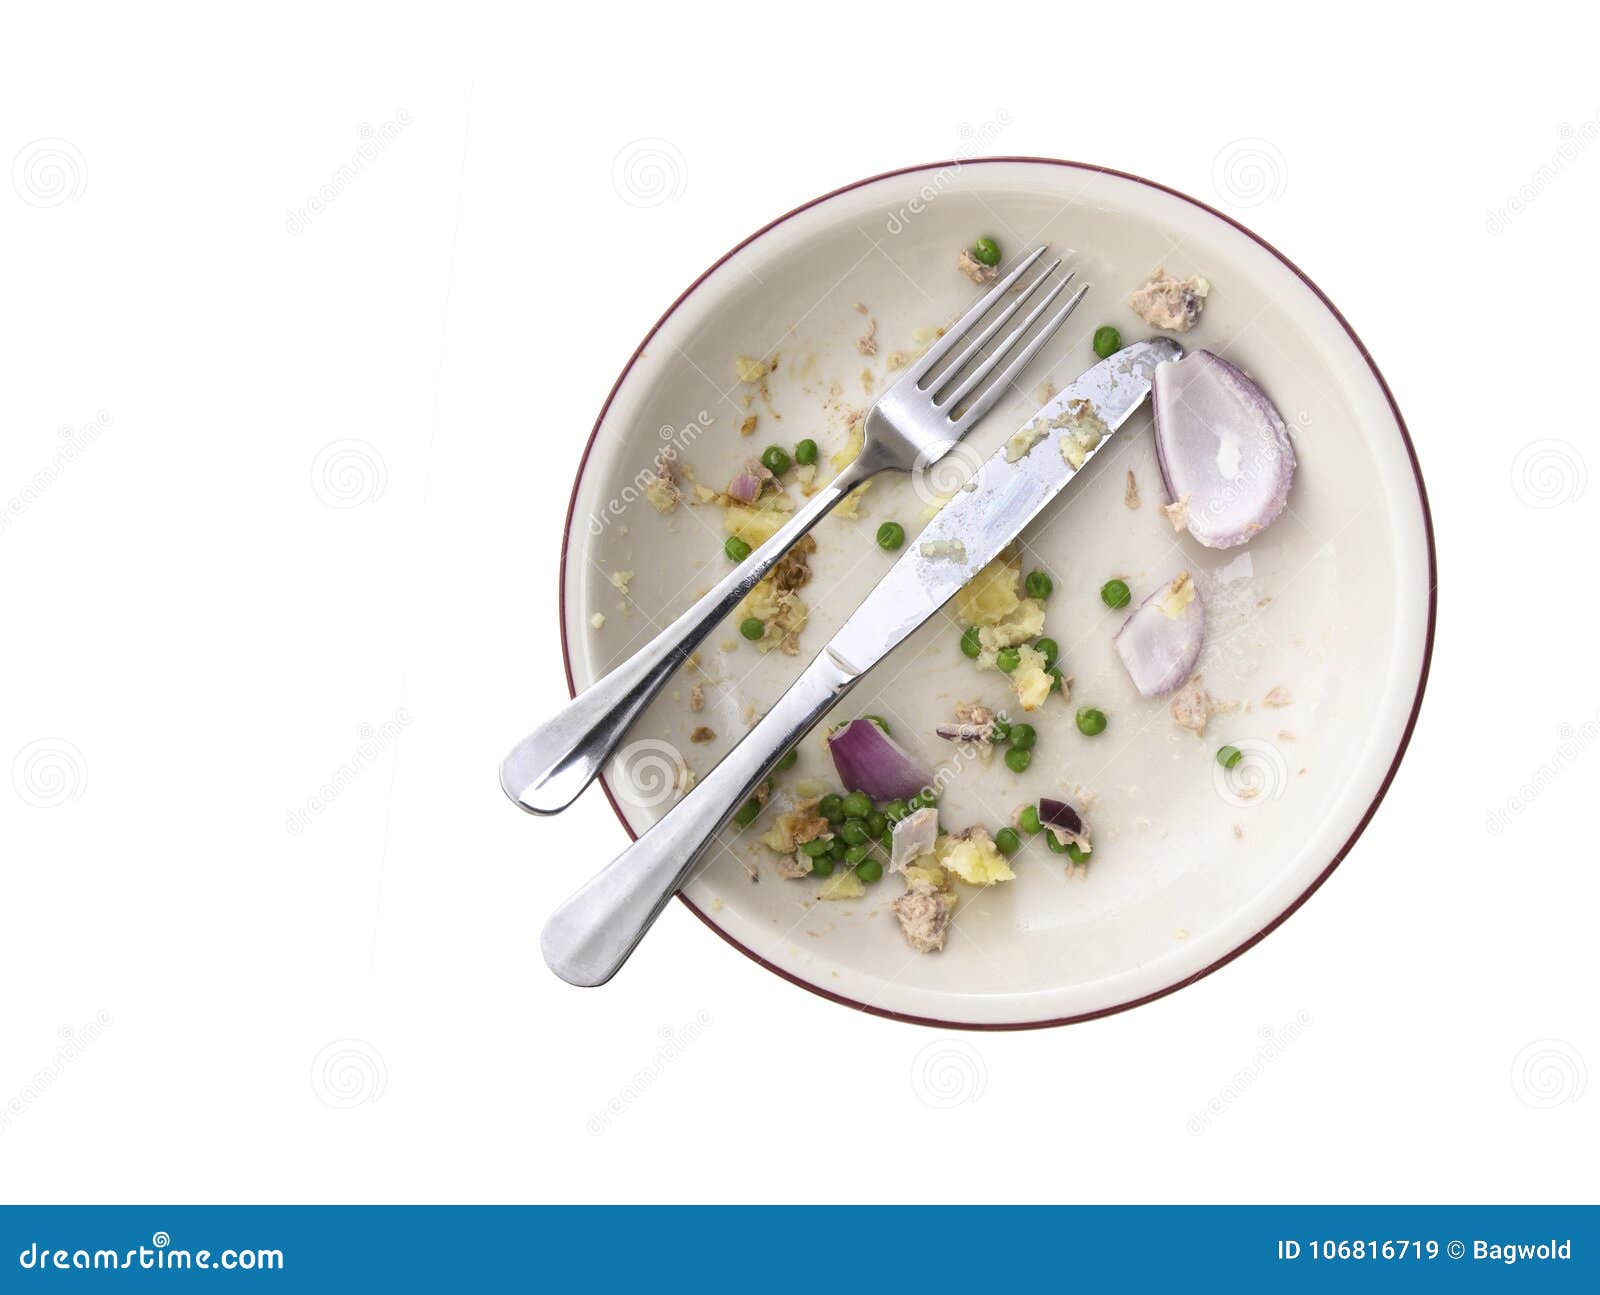 overhead shot of an empty plate with leftovers from a meal on a white background